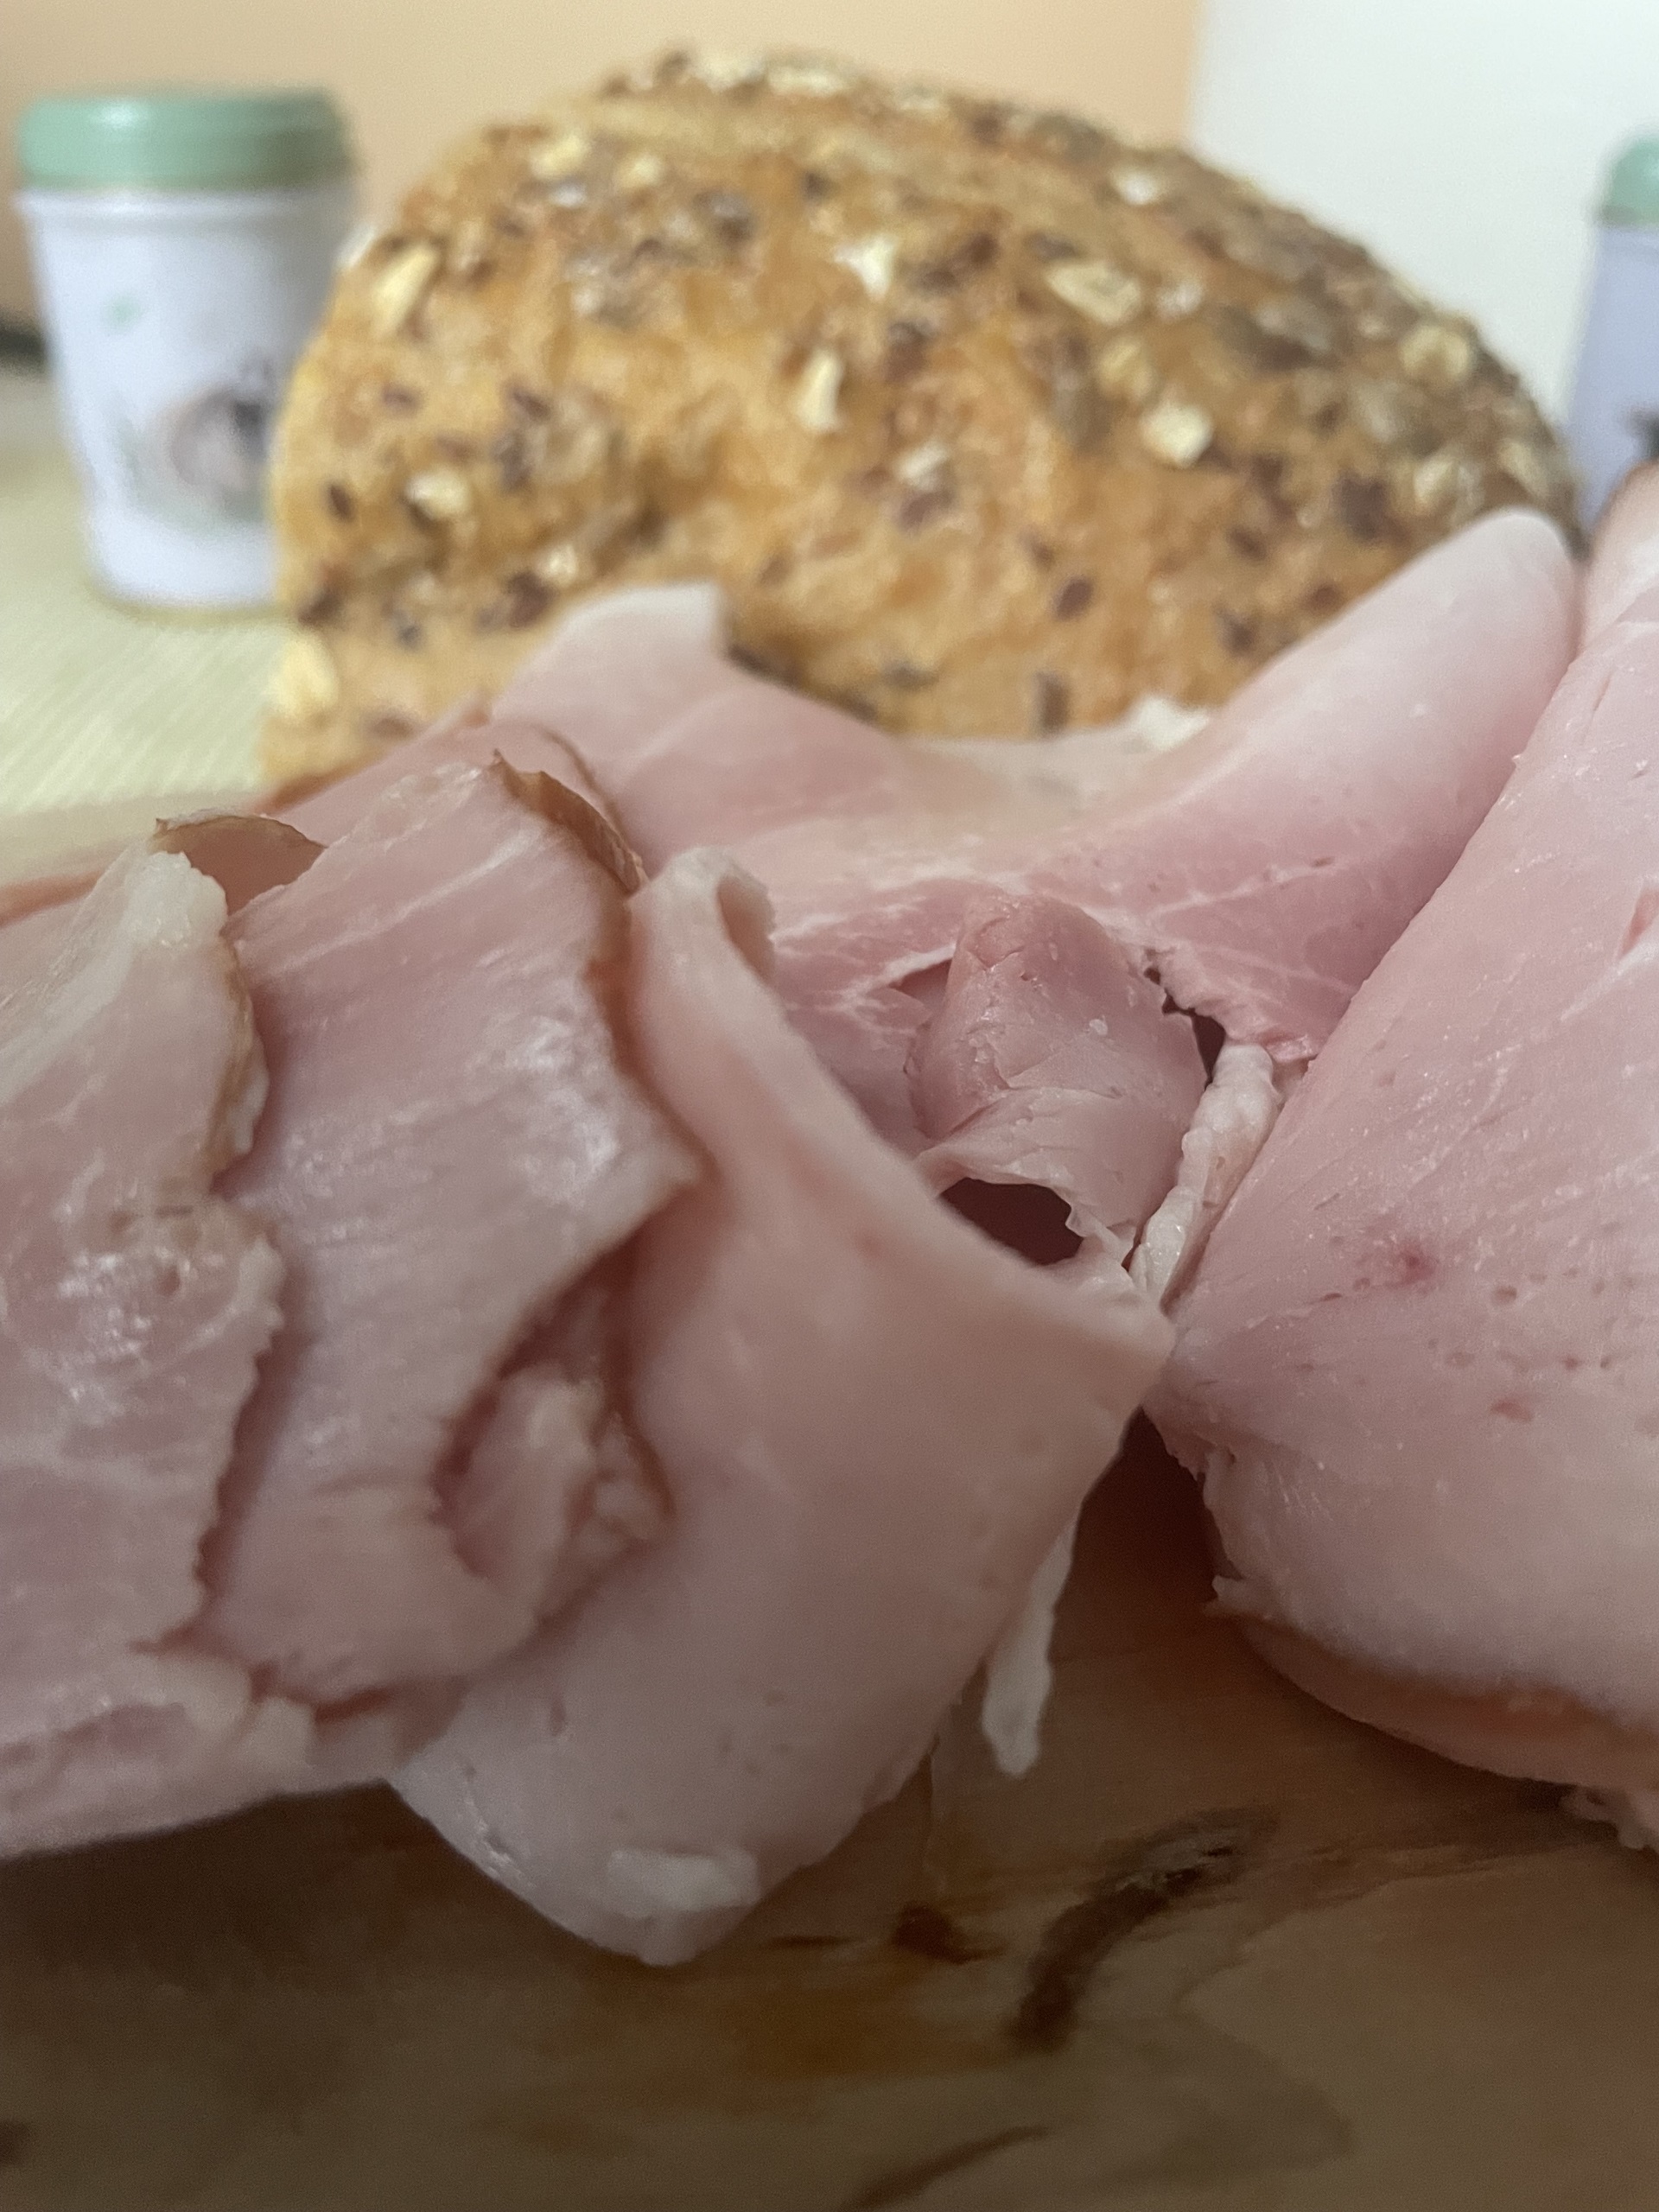 Slices of Polish ham right off the bone with a multigrain loaf of bread in the background, closeup.